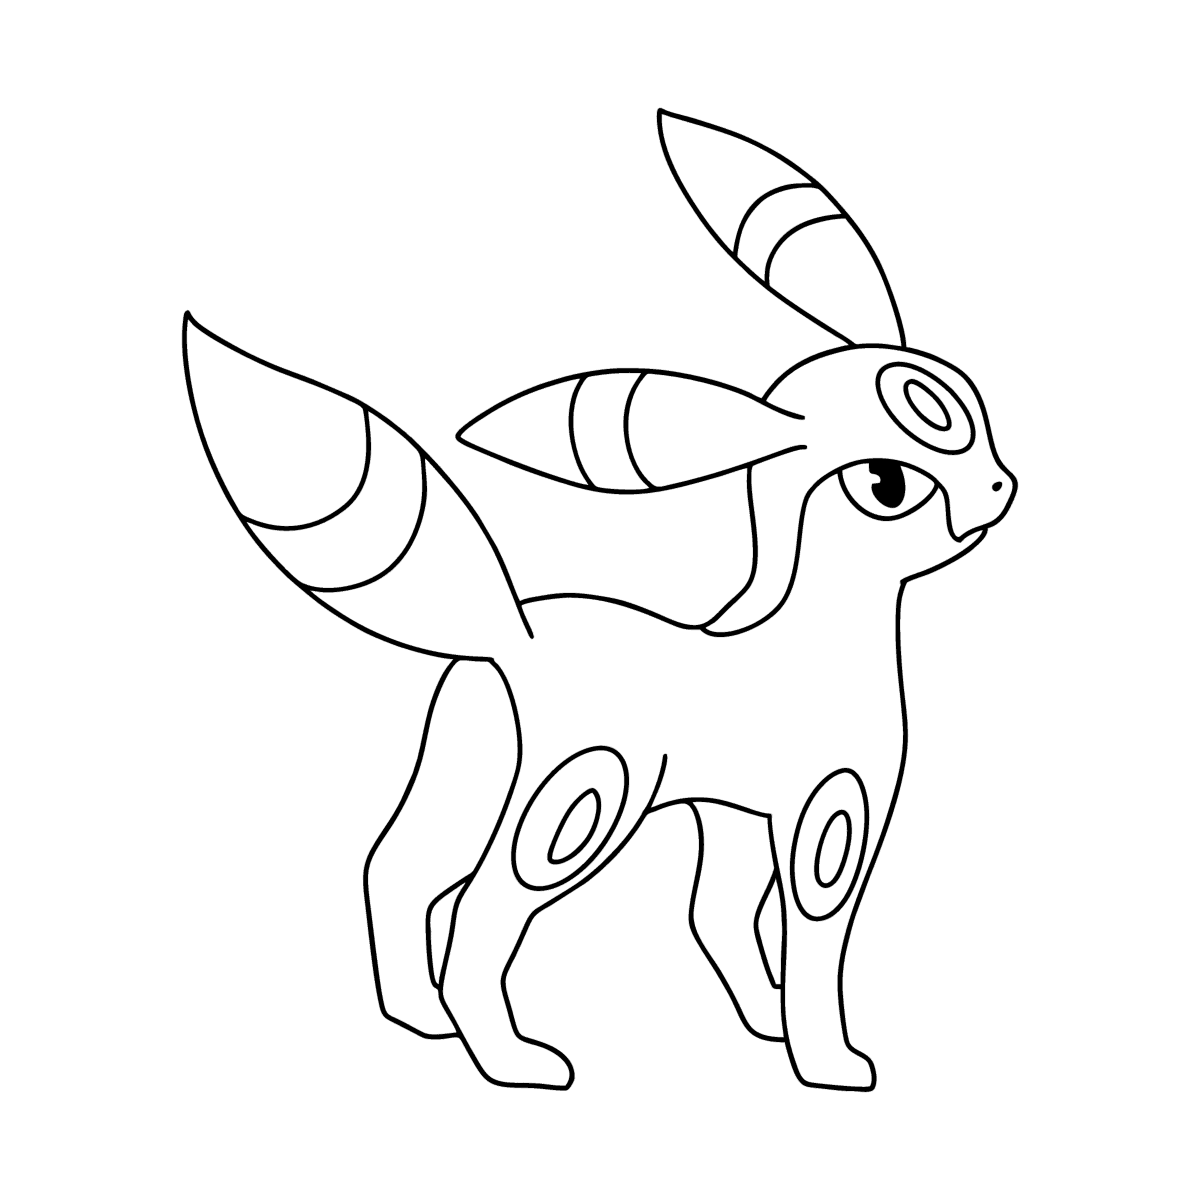 Coloring page pokemon go umbreon â online and print for free